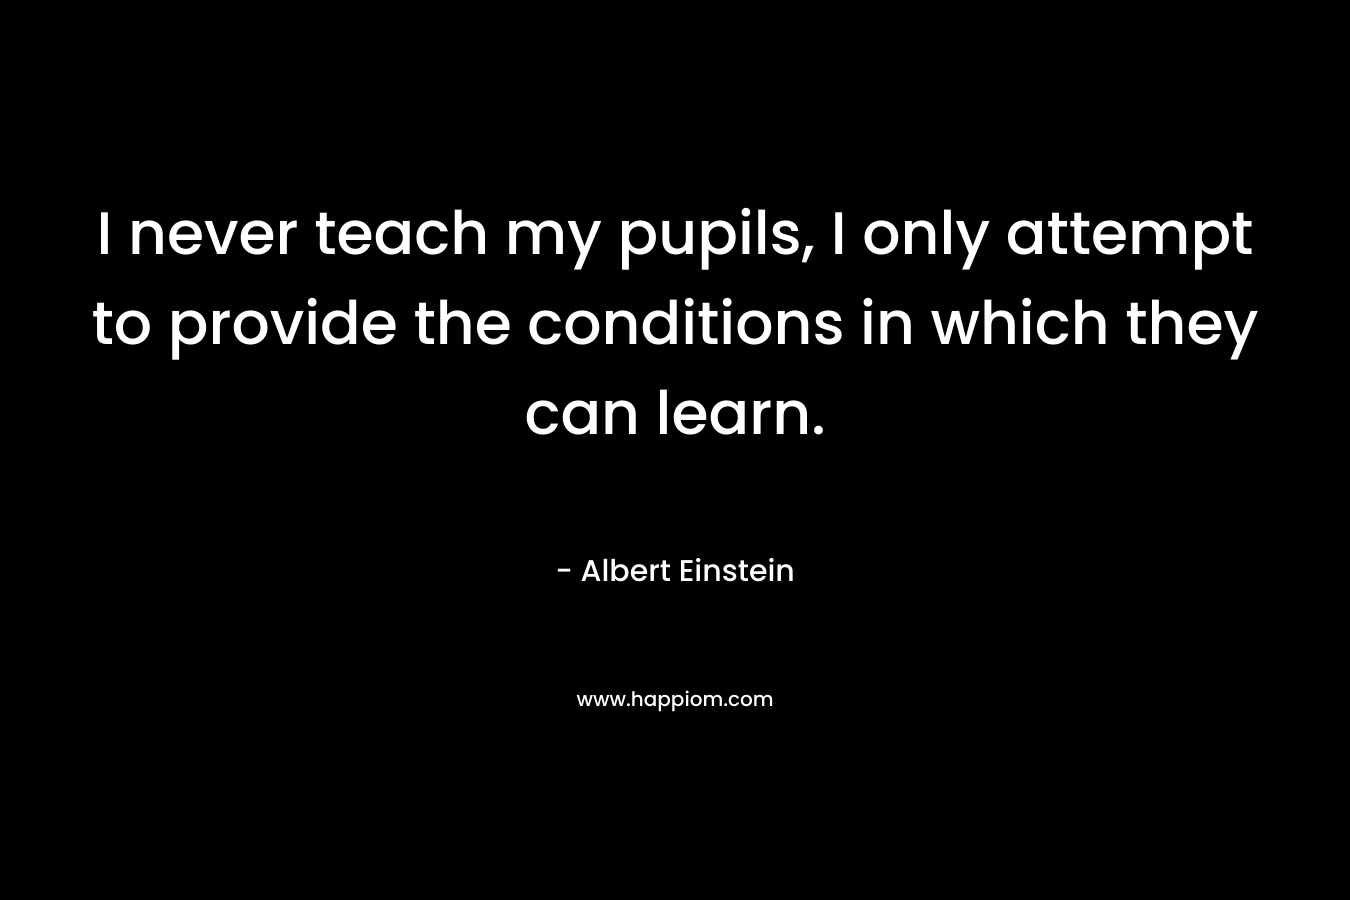 I never teach my pupils, I only attempt to provide the conditions in which they can learn. – Albert Einstein